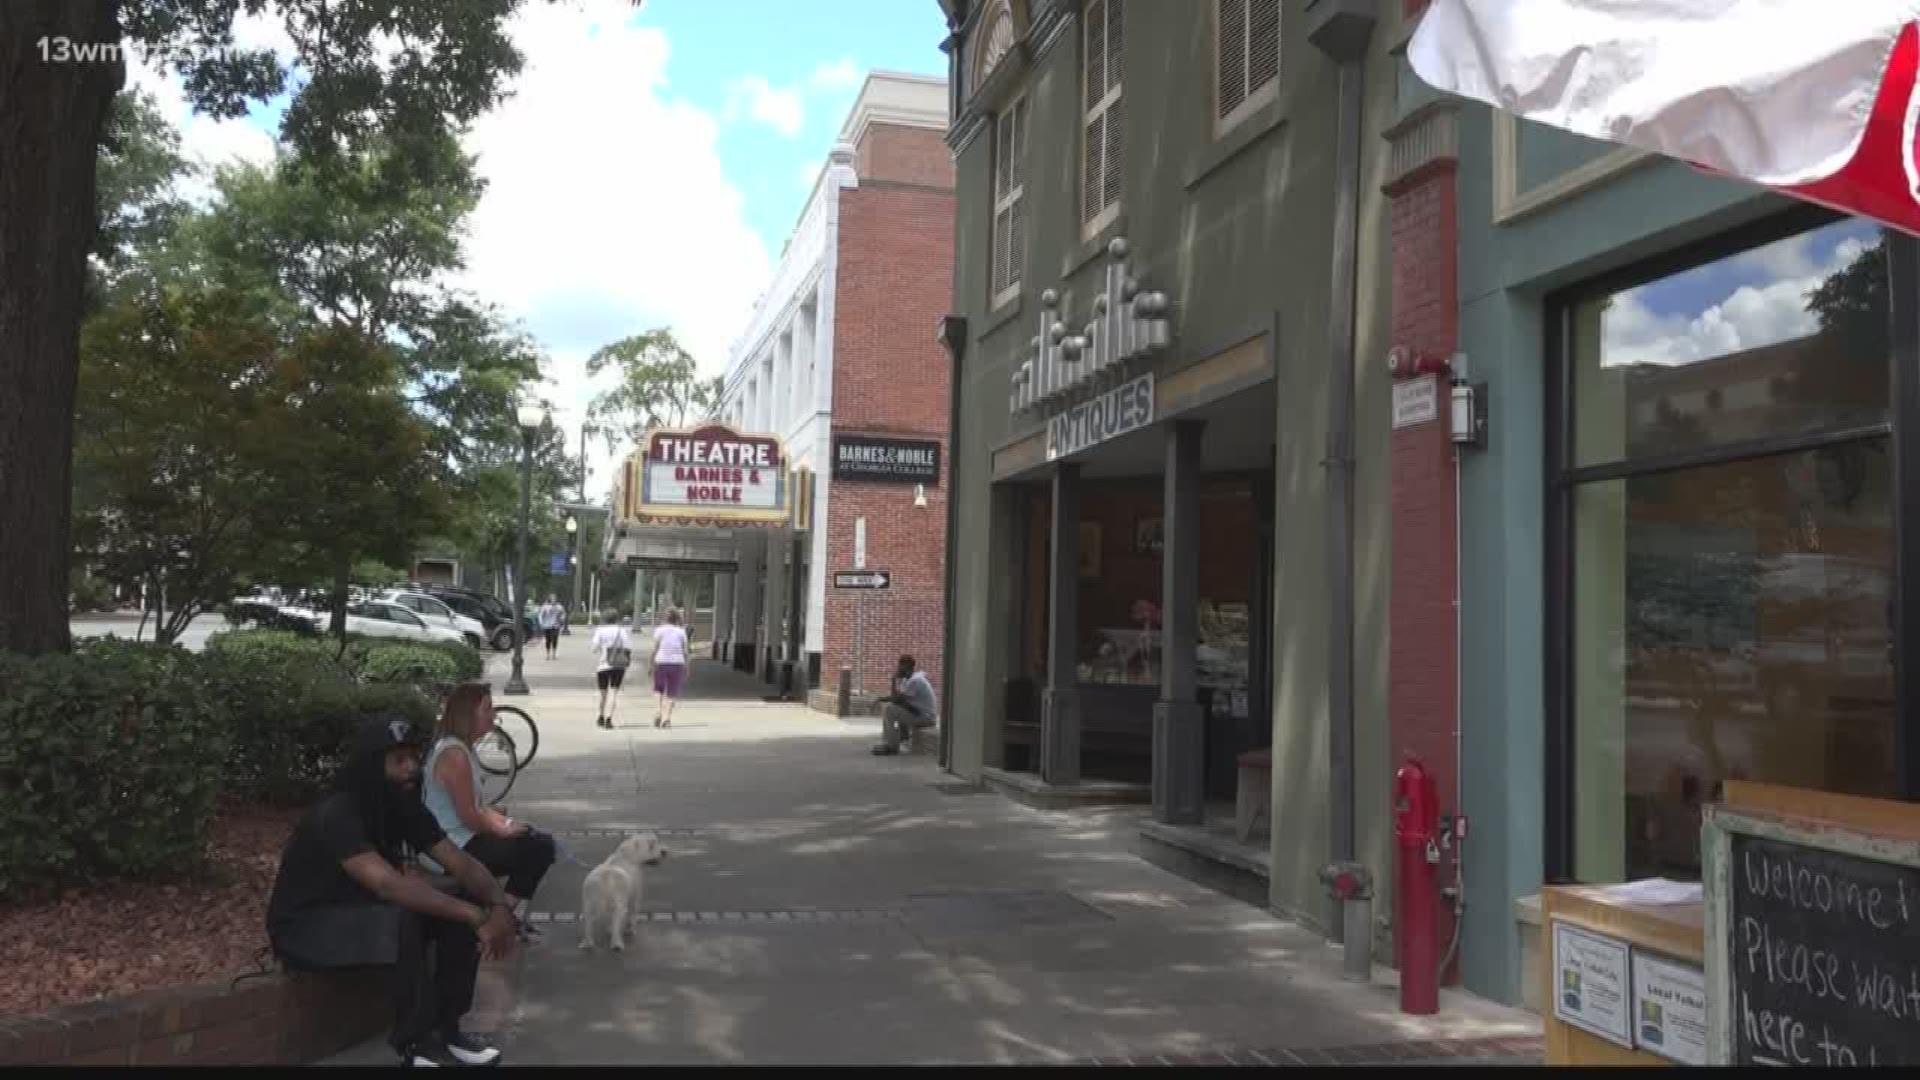 Budget Travel, a travel website, ranked Milledgeville as the fifth coolest small town in America. The list had 10 towns total on it, and Milledgeville residents told us why they love the city so much.